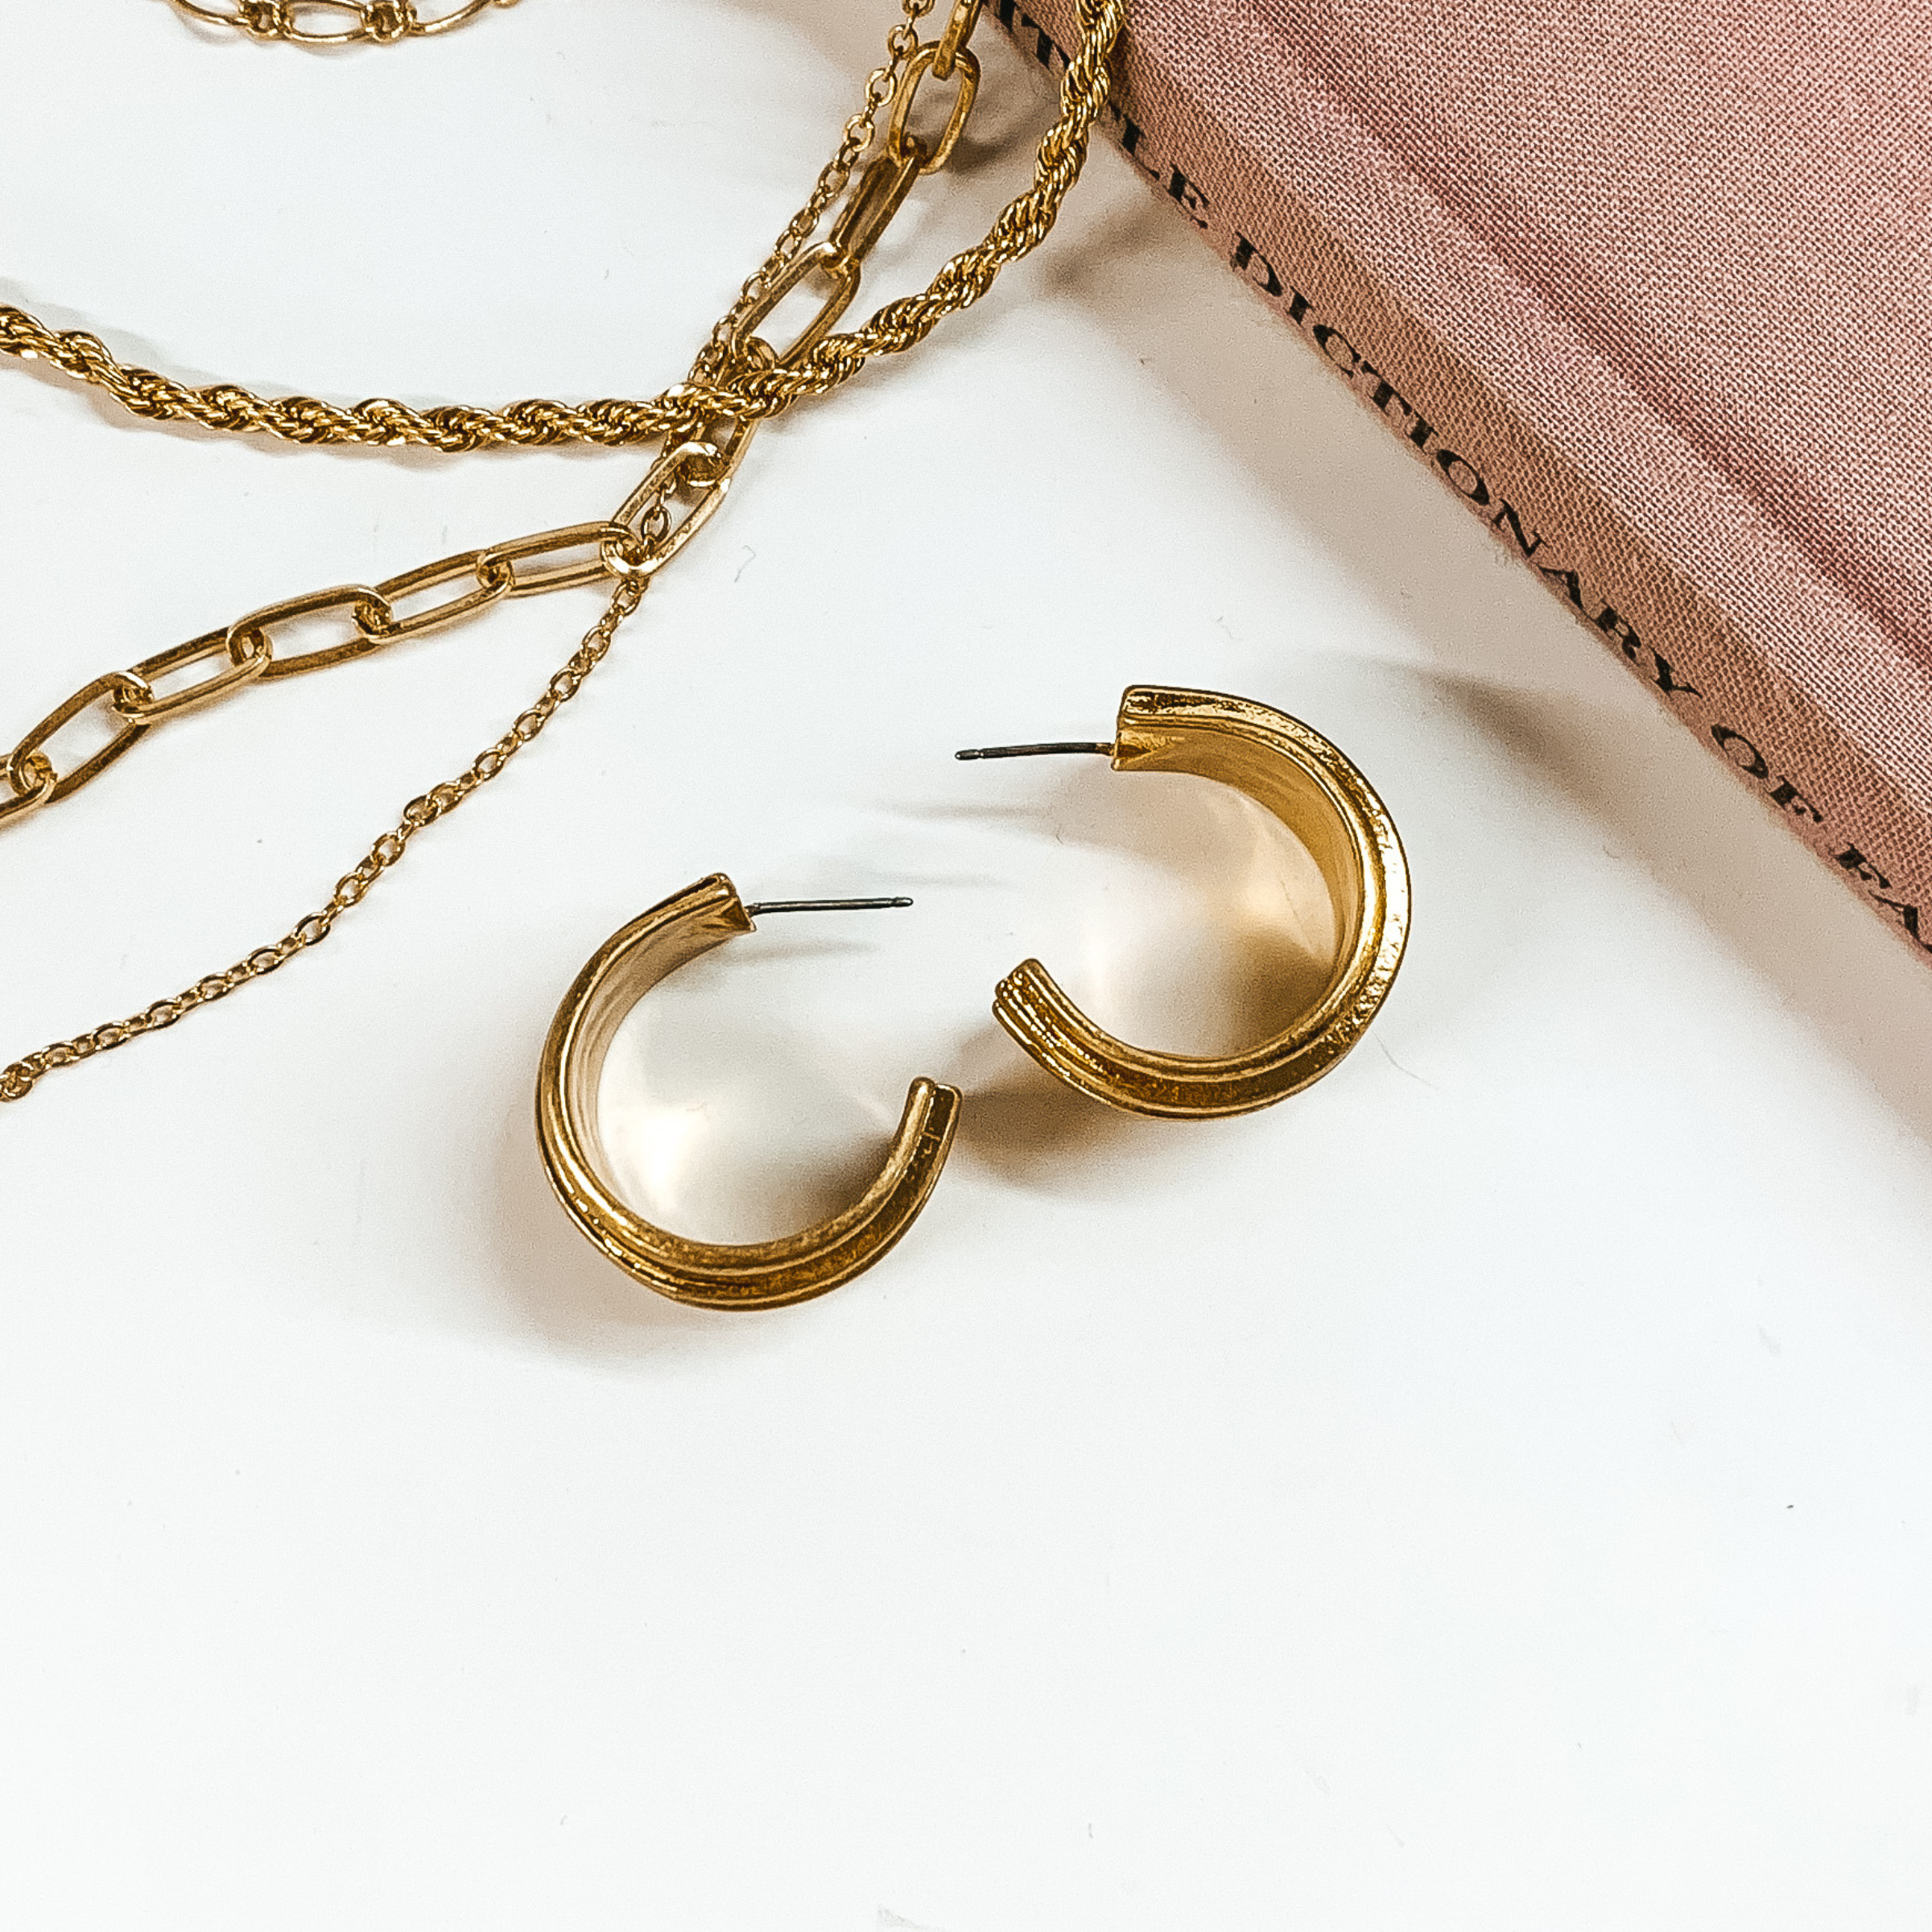 Enjoy the View Thick Hoop Earrings in Gold Tone - Giddy Up Glamour Boutique